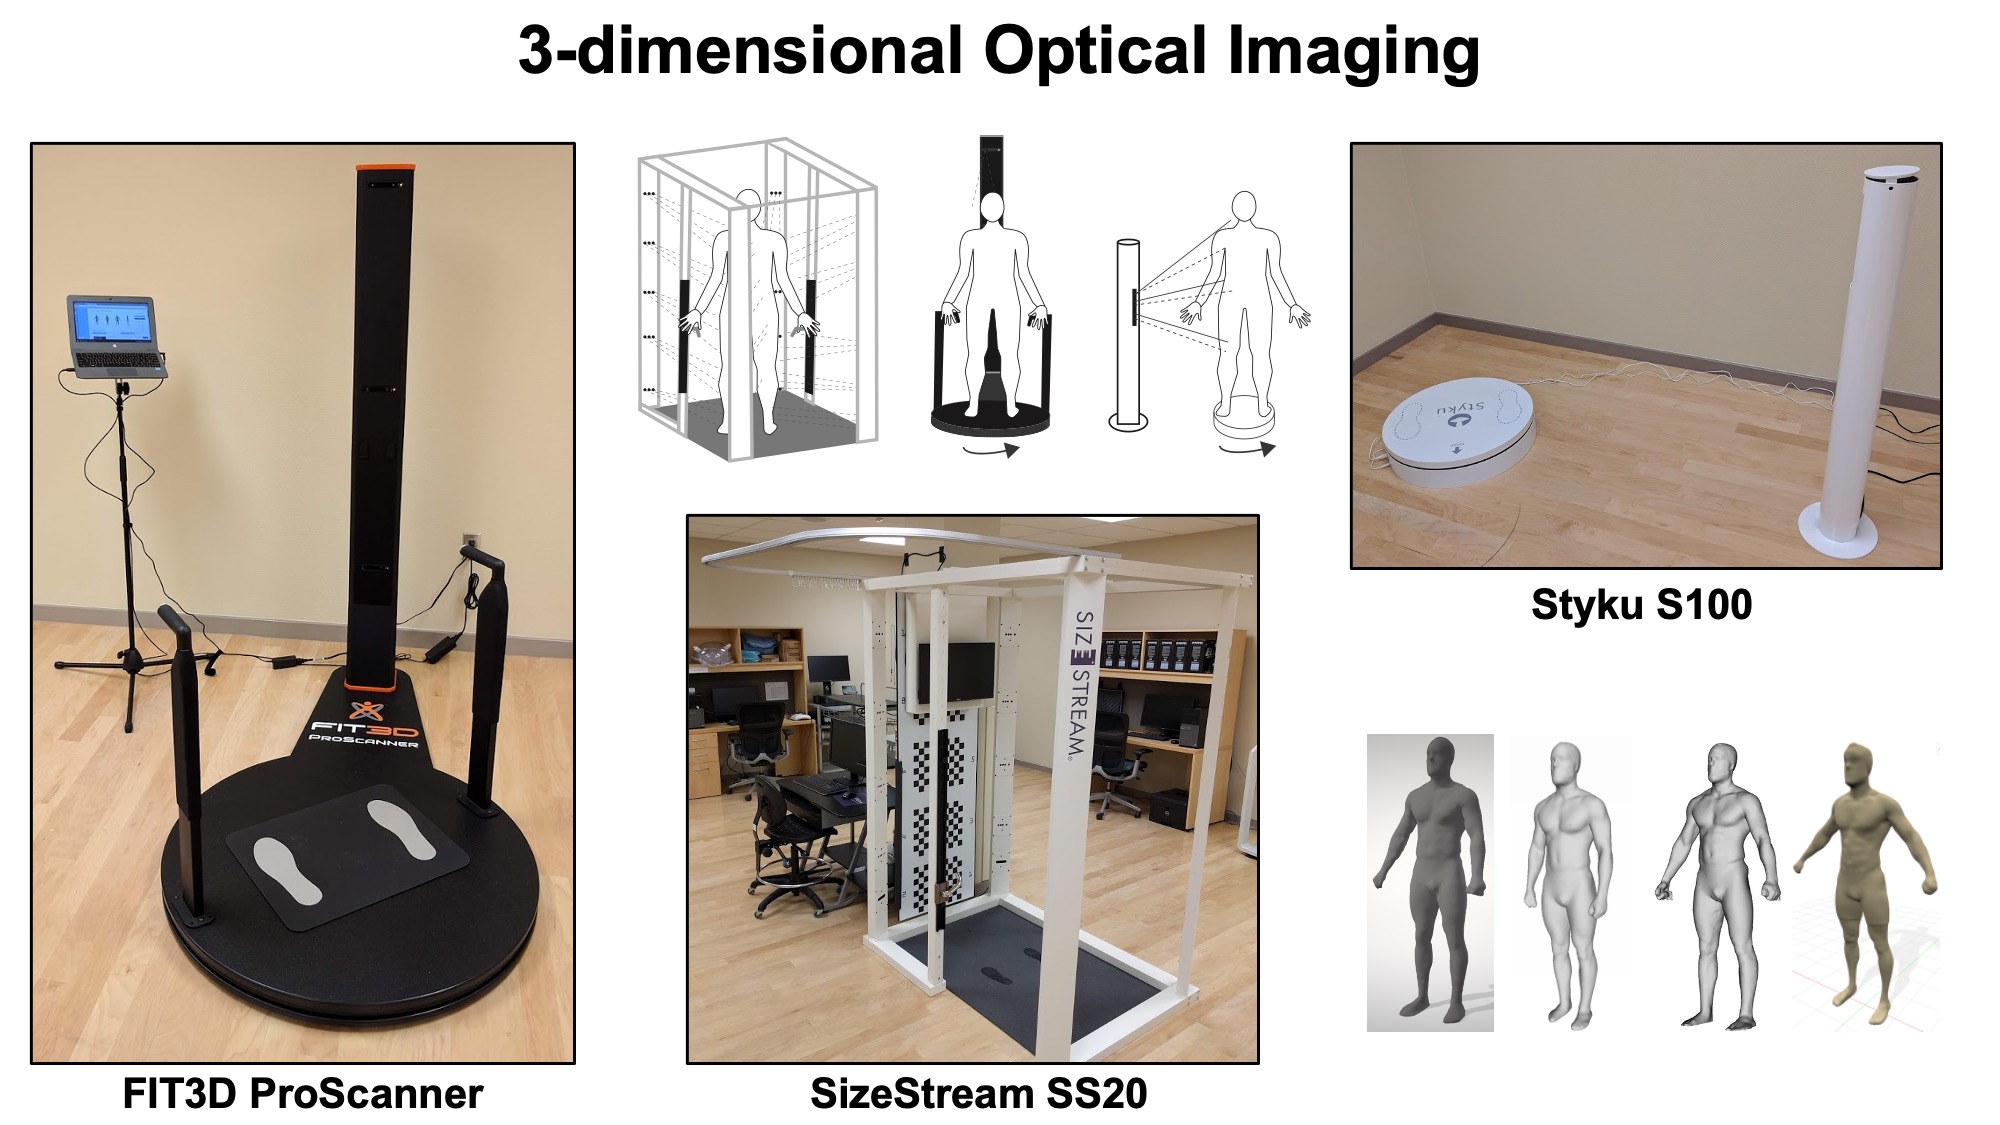 3d scanners